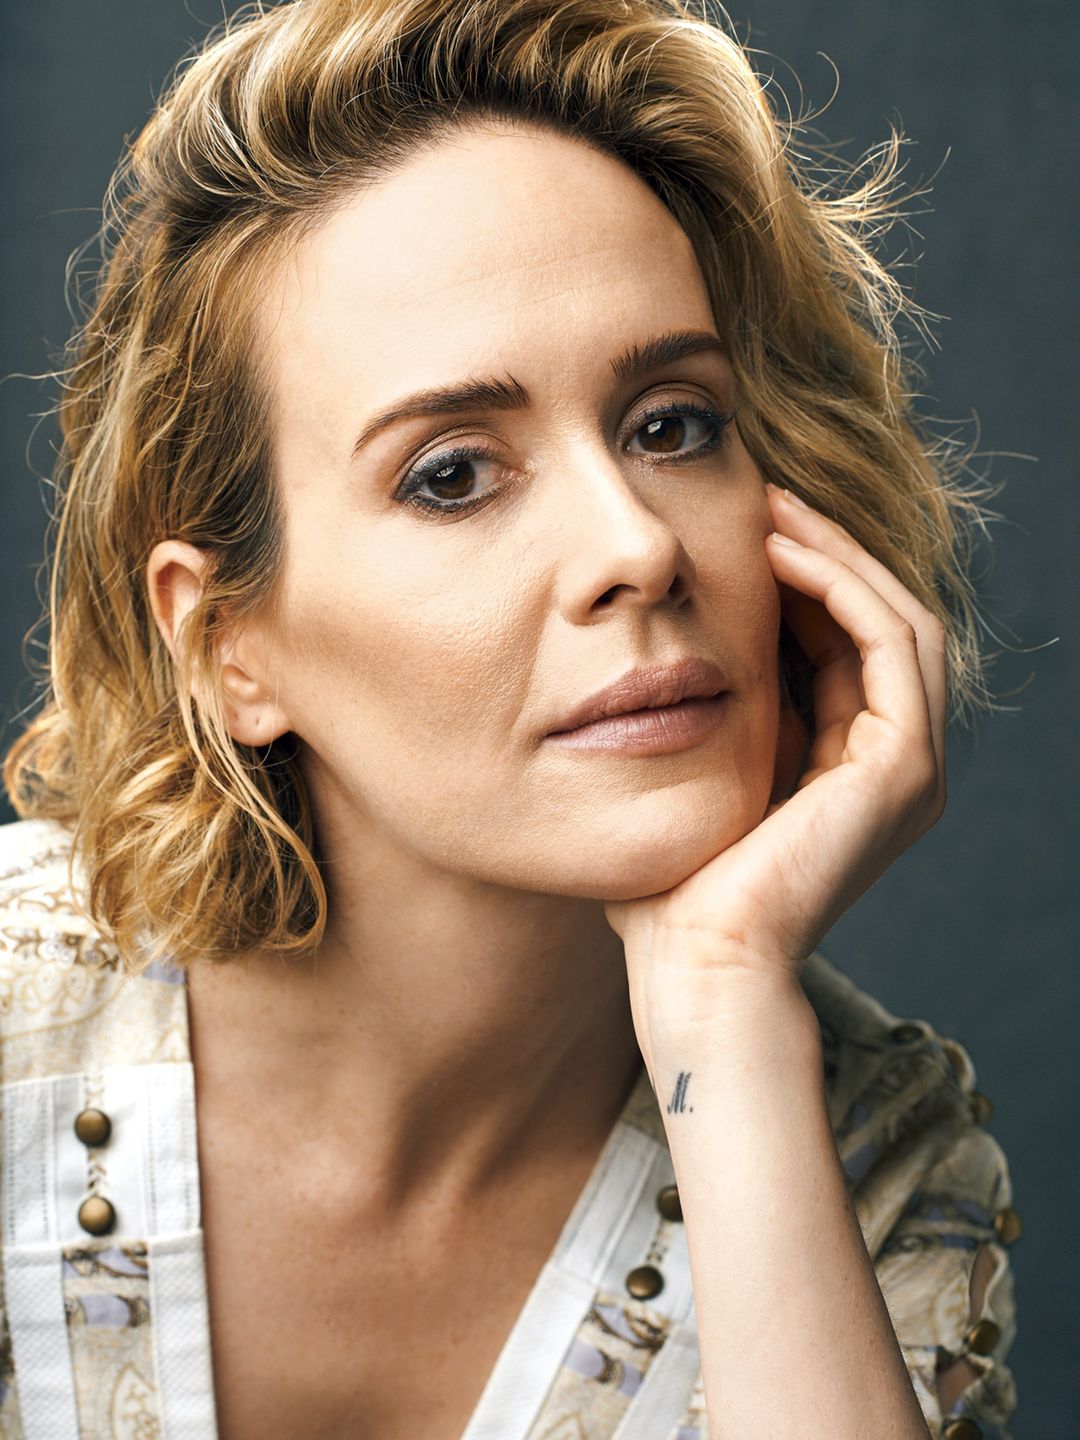 Sarah Paulson in her youth